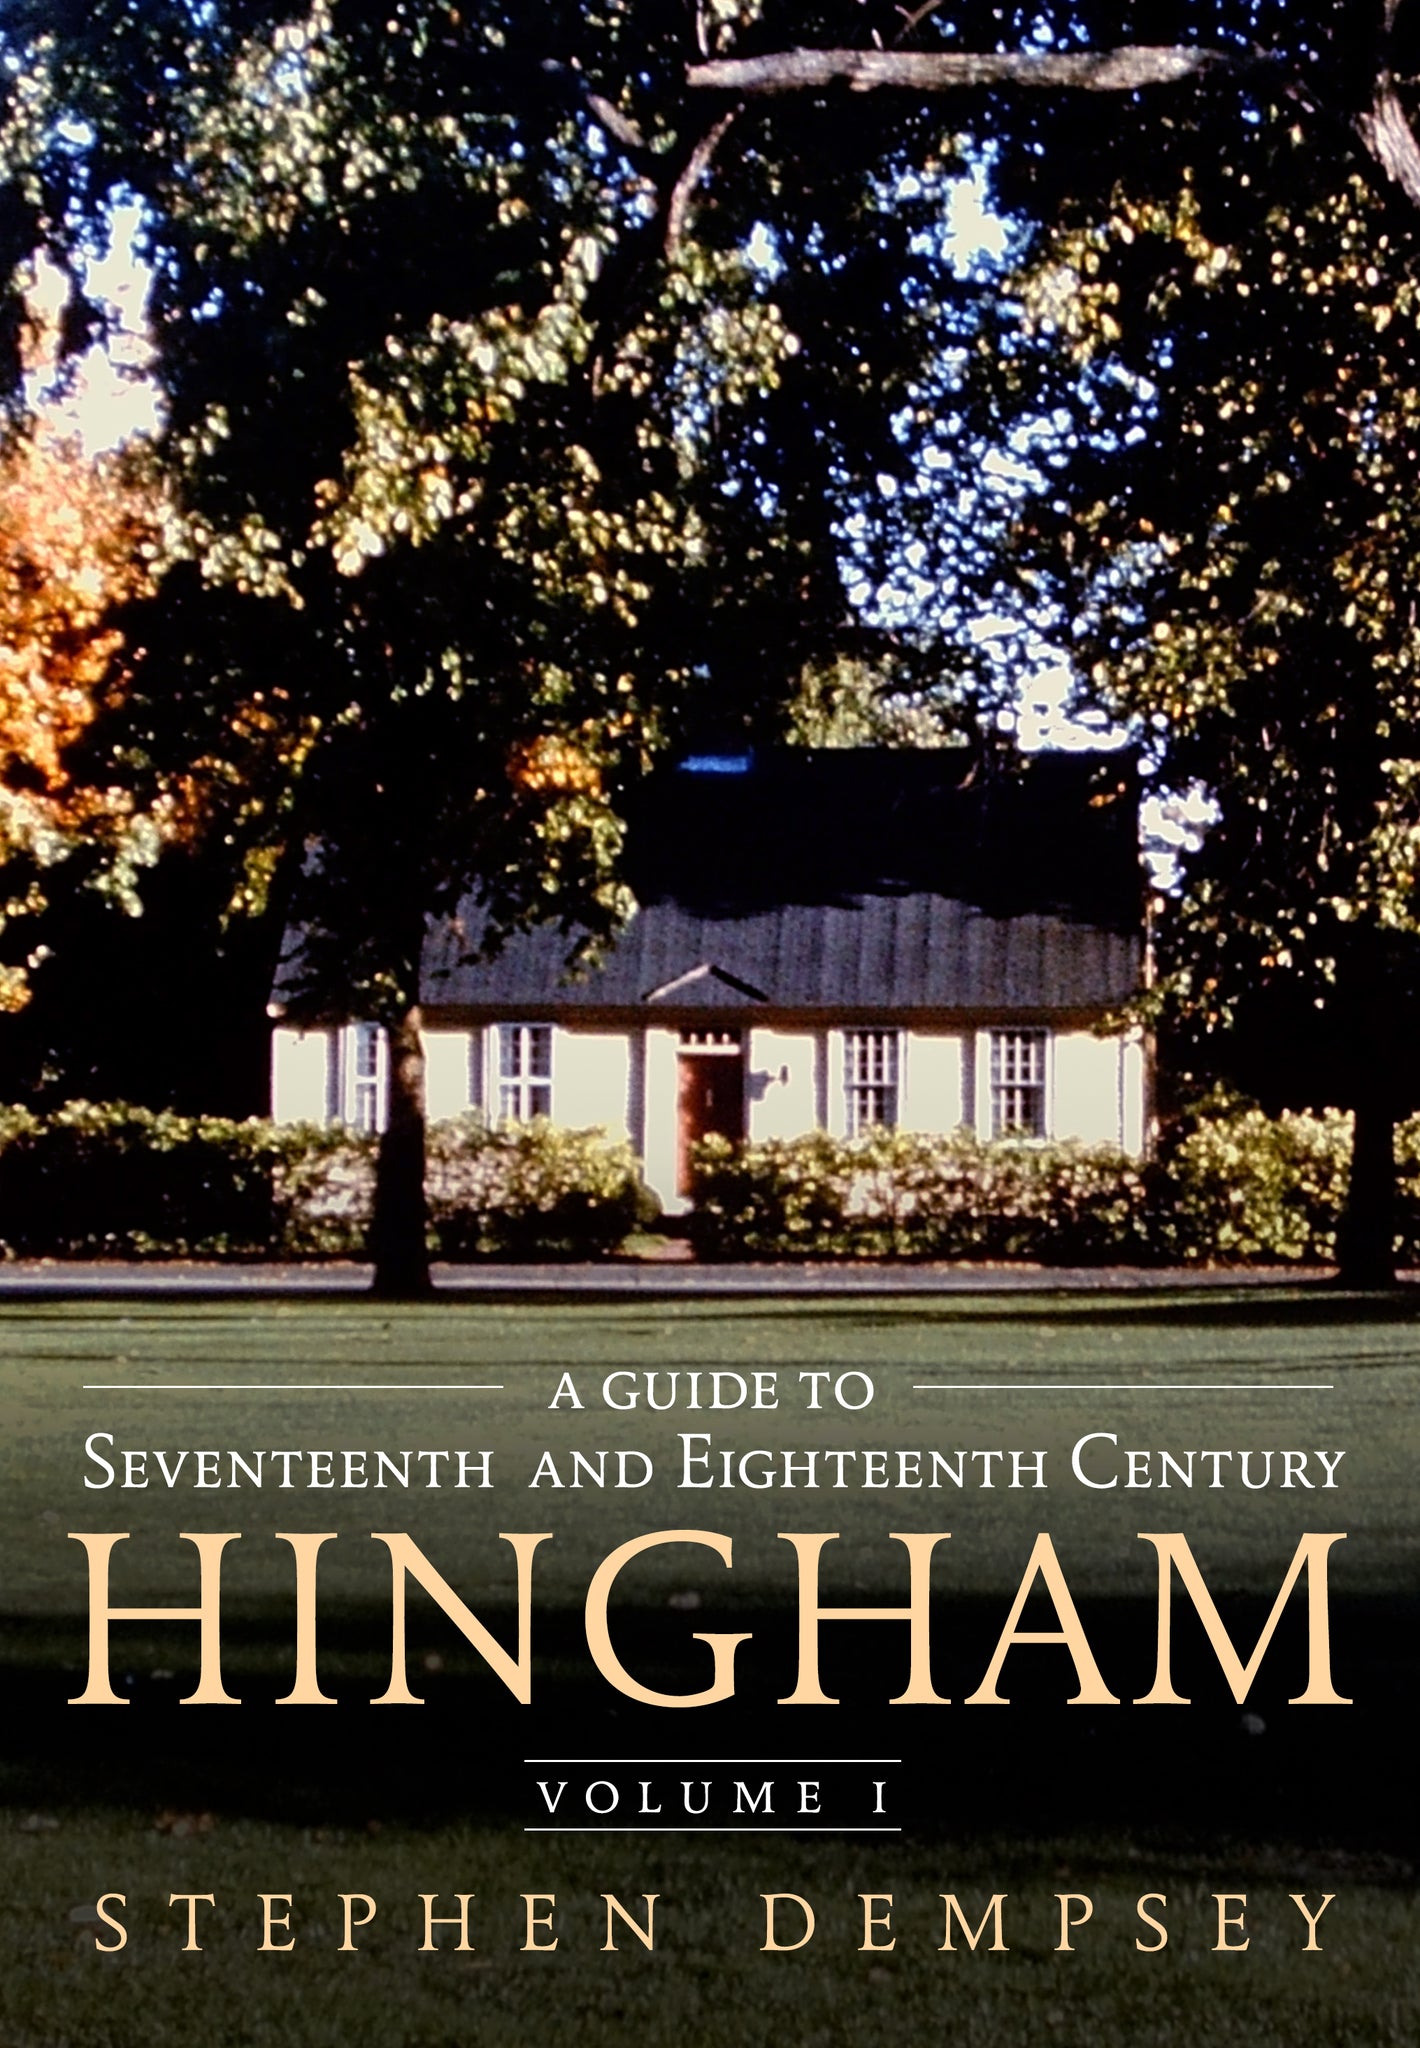 A Guide to Seventeenth and Eighteenth Century Hingham Volume I - published by America Through Time